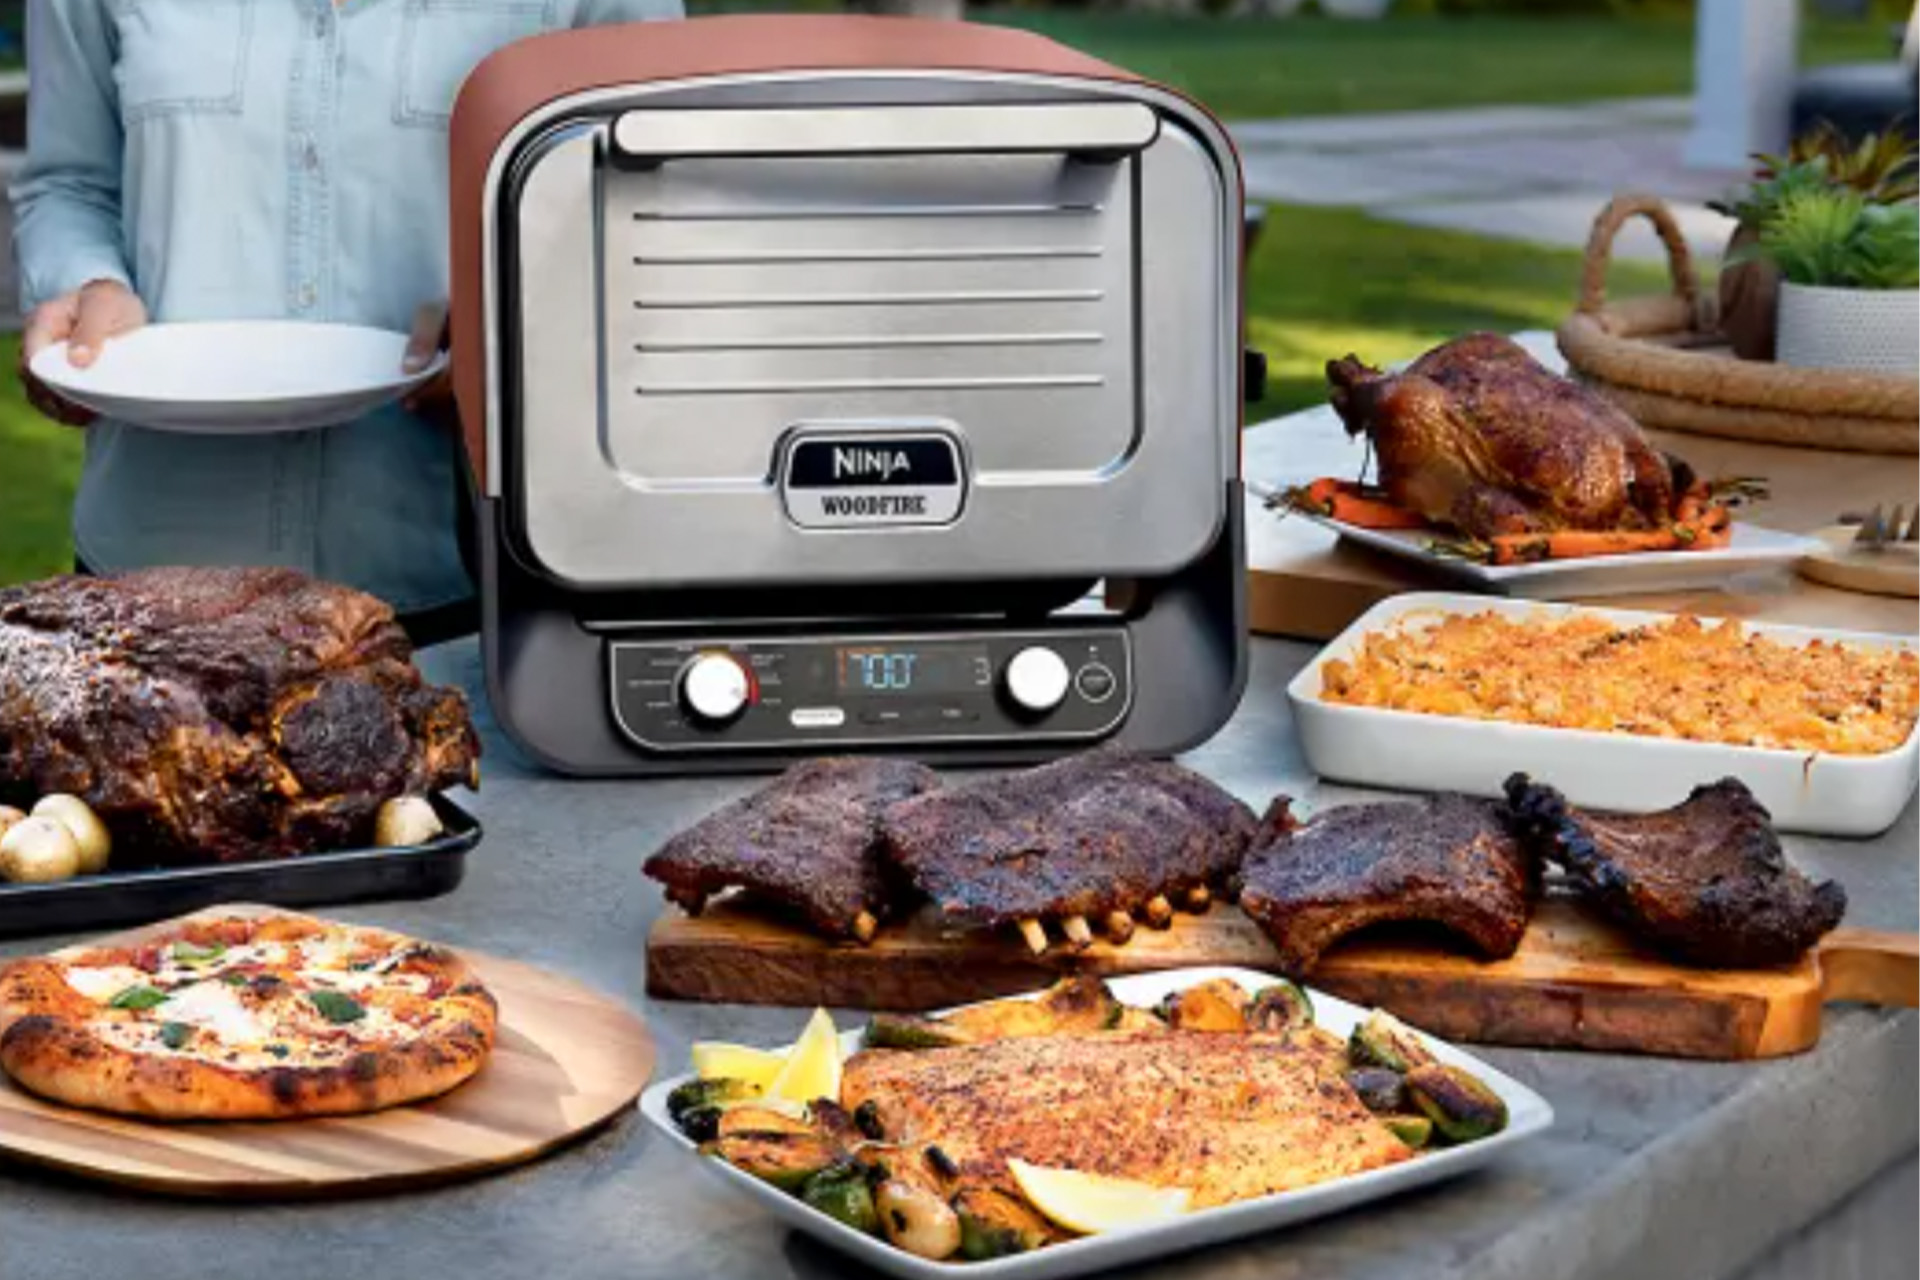 Ninja launches outdoor woodfire electric BBQ Grill and Smoker for